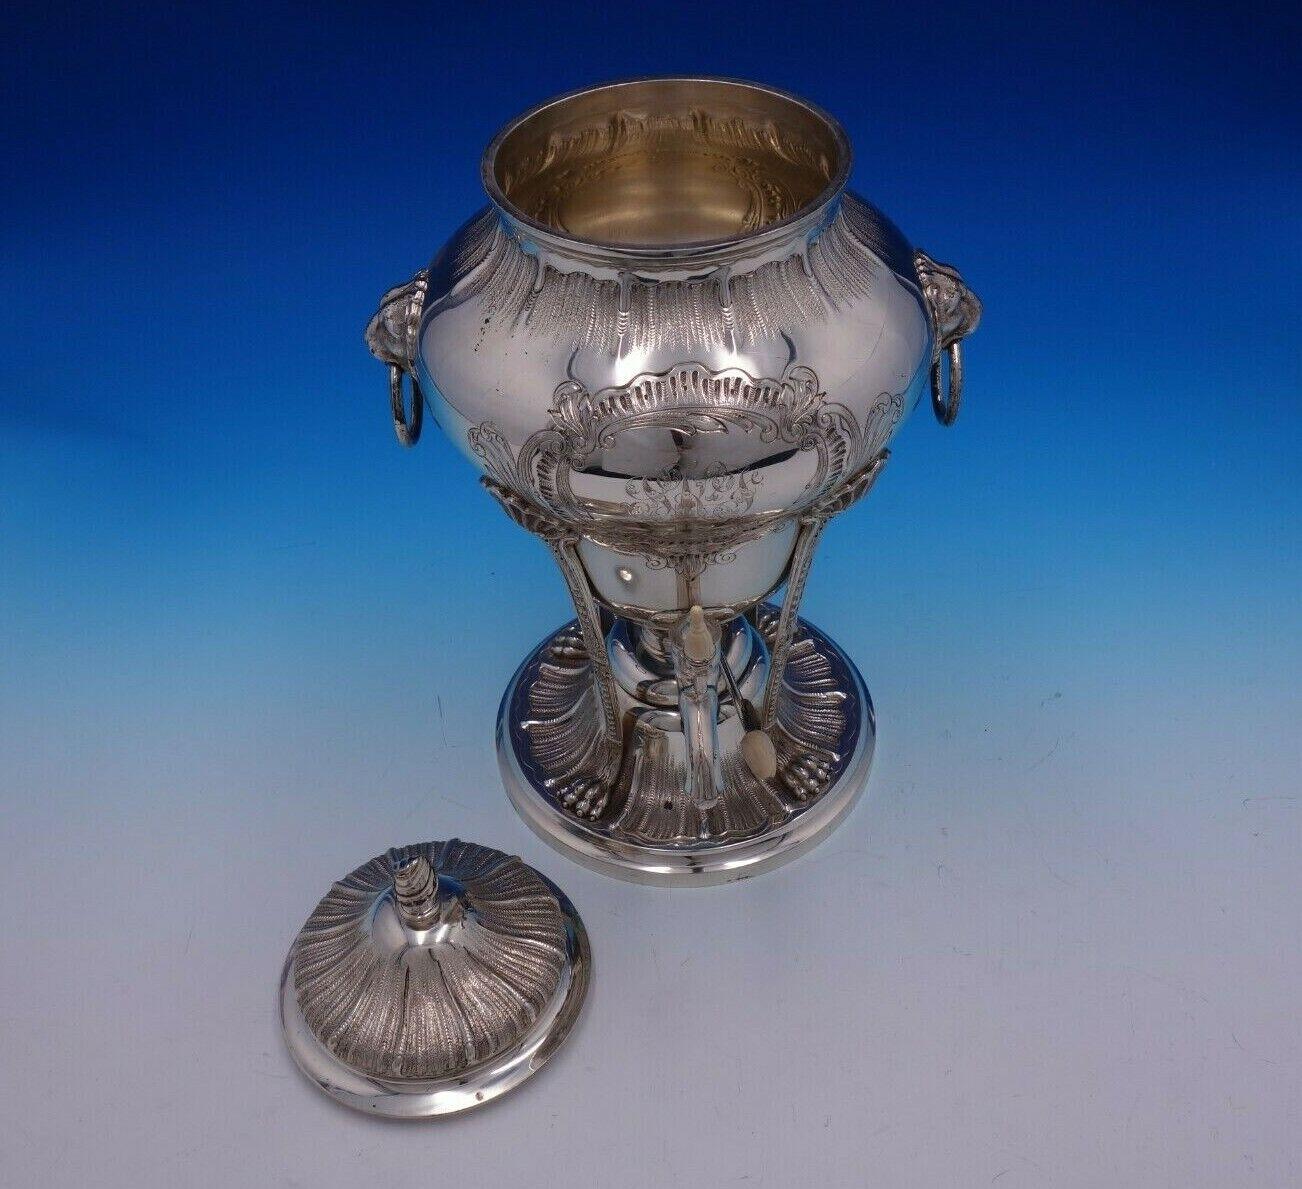 eorge II by Tuttle

Exceptional George II by Tuttle sterling silver chased coffee urn with lion handles and paws marked #435. This piece measures 14